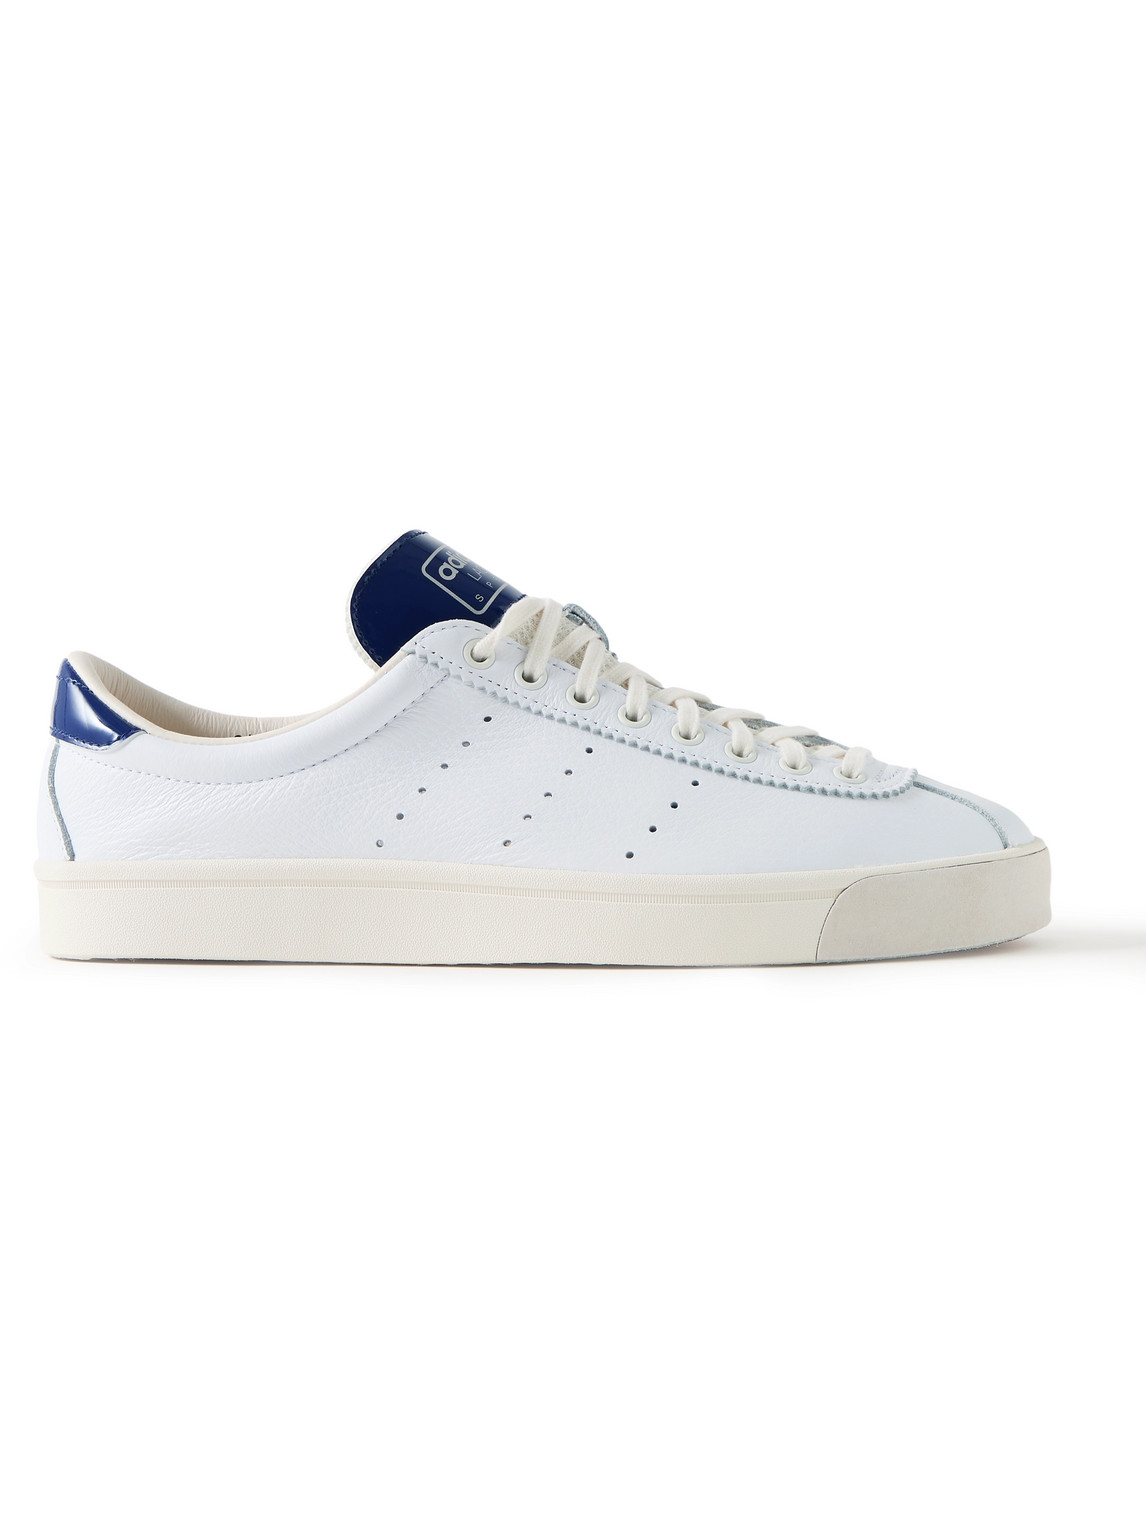 Lacombe Spezial Rubber-Trimmed Mesh and Leather Sneakers